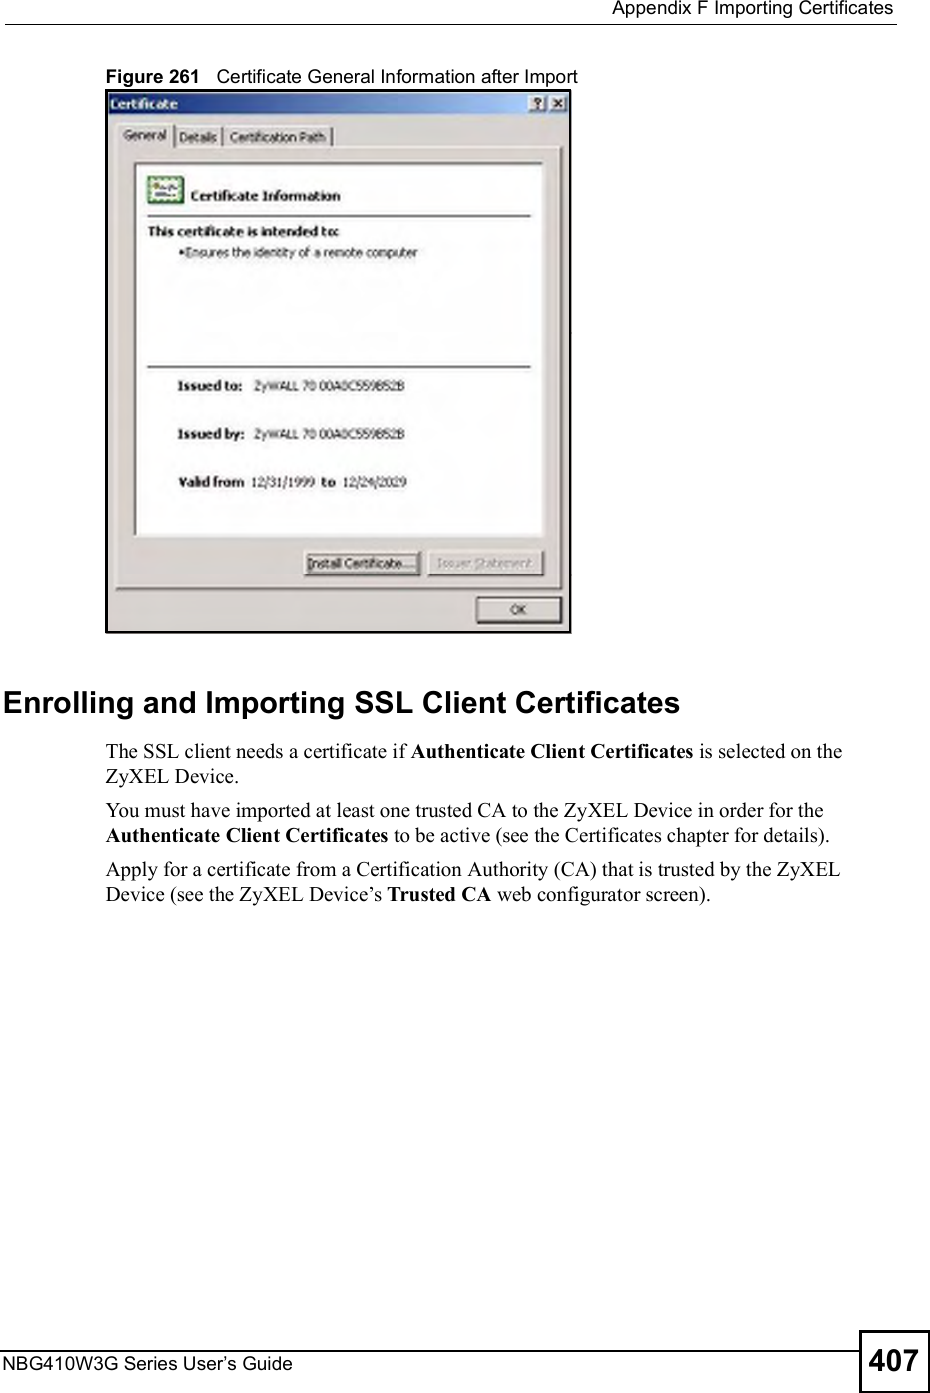  Appendix FImporting CertificatesNBG410W3G Series User s Guide 407Figure 261   Certificate General Information after ImportEnrolling and Importing SSL Client CertificatesThe SSL client needs a certificate if Authenticate Client Certificates is selected on the ZyXEL Device.You must have imported at least one trusted CA to the ZyXEL Device in order for the Authenticate Client Certificates to be active (see the Certificates chapter for details). Apply for a certificate from a Certification Authority (CA) that is trusted by the ZyXEL Device (see the ZyXEL Device!s Trusted CA web configurator screen).